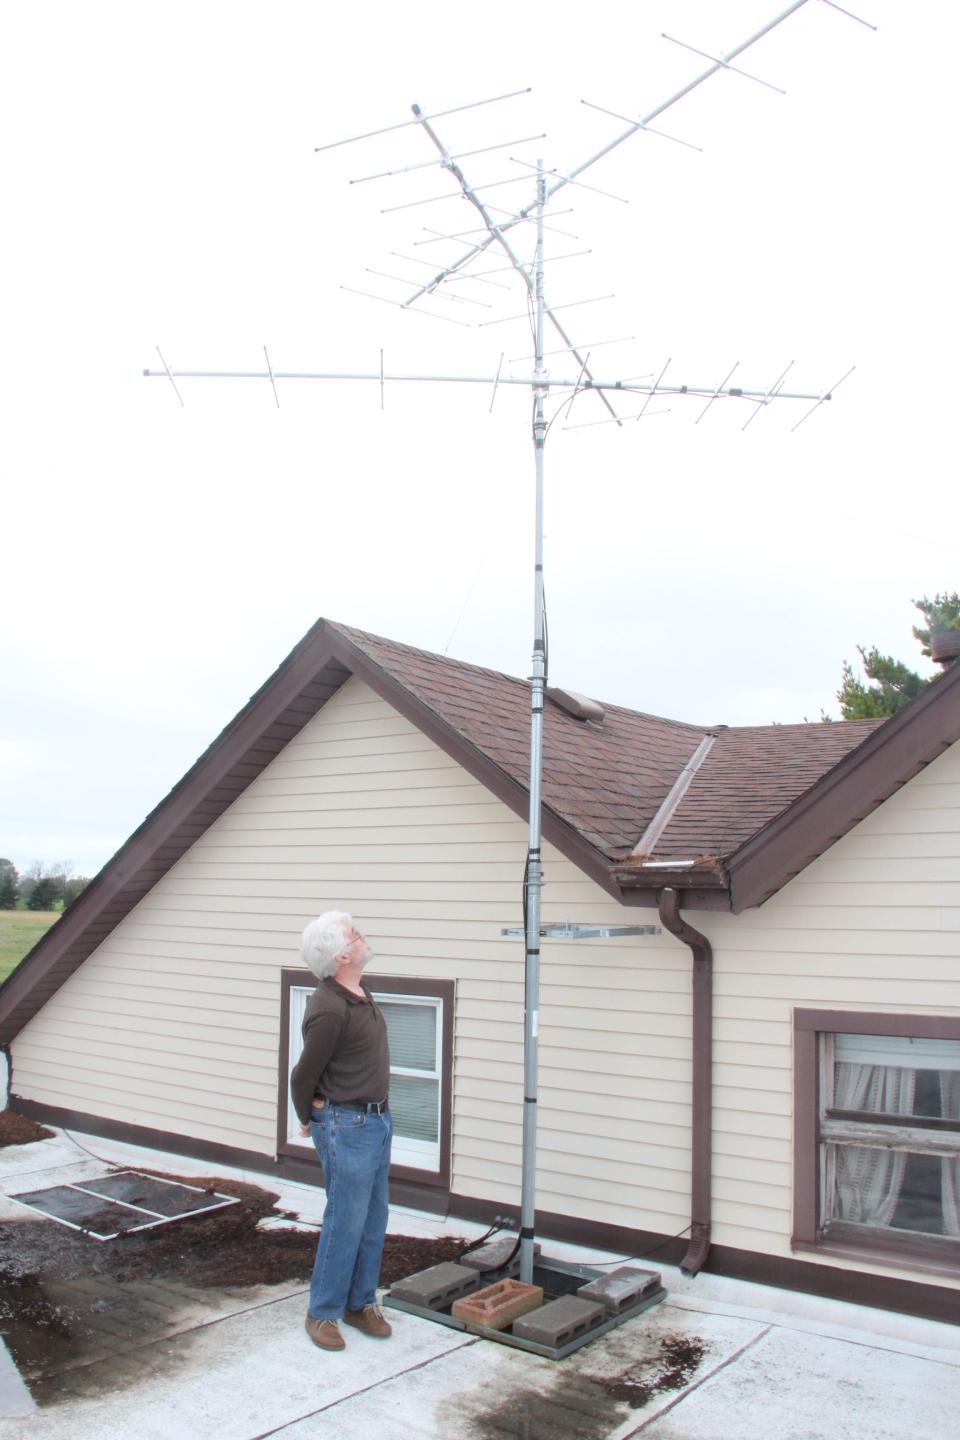 Bill Mueller of Milwaukee inspects a Motus receiver in 2019 on the roof of the Western Great Lakes Bird and Bat Observatory in Port Washington. The Motus project tracks movements of birds fitted with small radio transmitters. The receiver has since been relocated to Afterglow Farm near Port Washington.